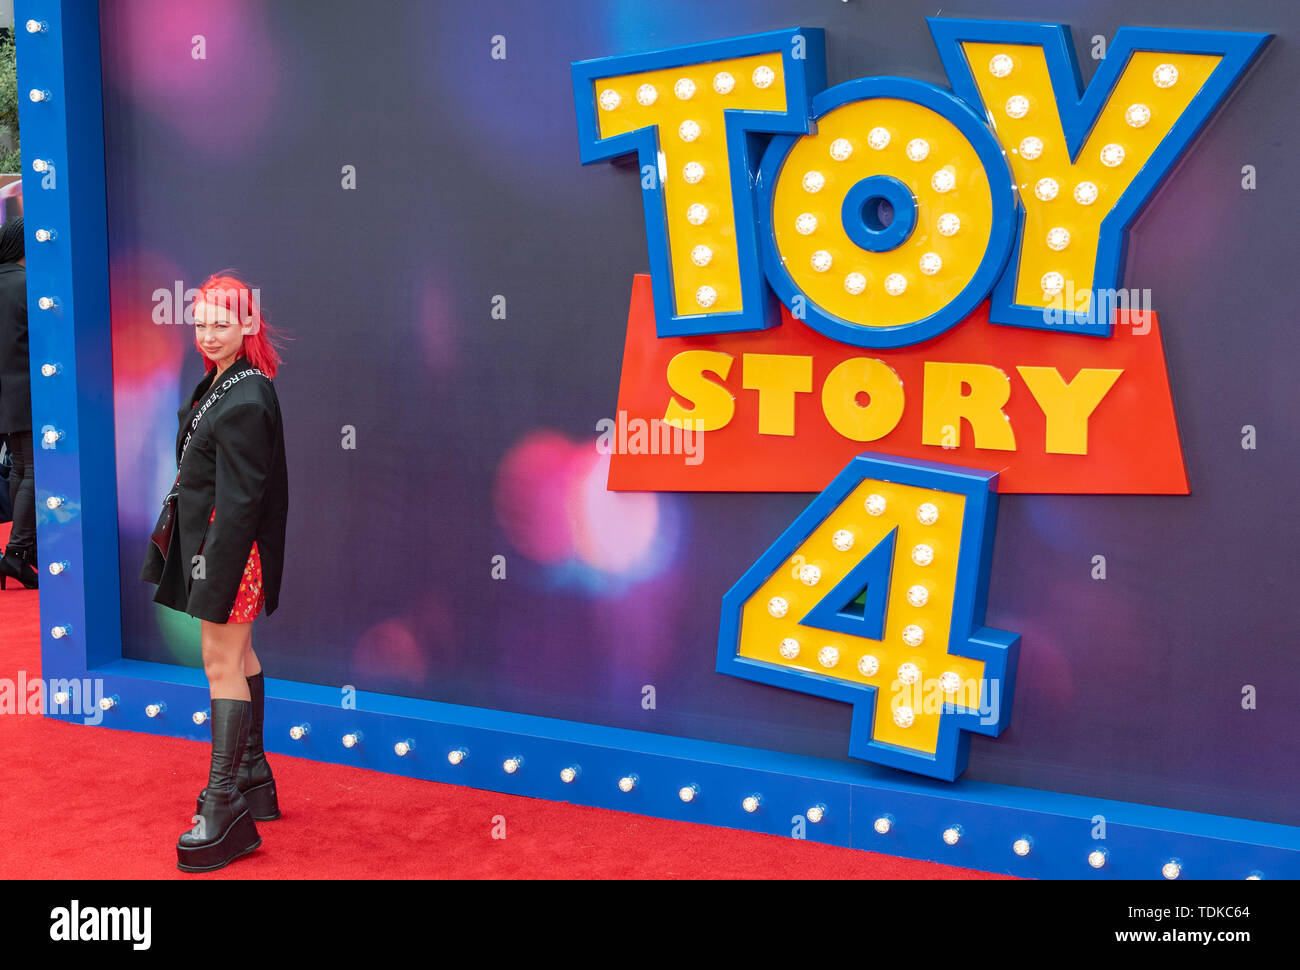 London, United Kingdom. 16 June 2019. Jess Woodley attends the European Premiere of 'Toy Story 4' held at the Odeon Luxe, Leicester Square in central London. Credit: Peter Manning/Alamy Live News Stock Photo